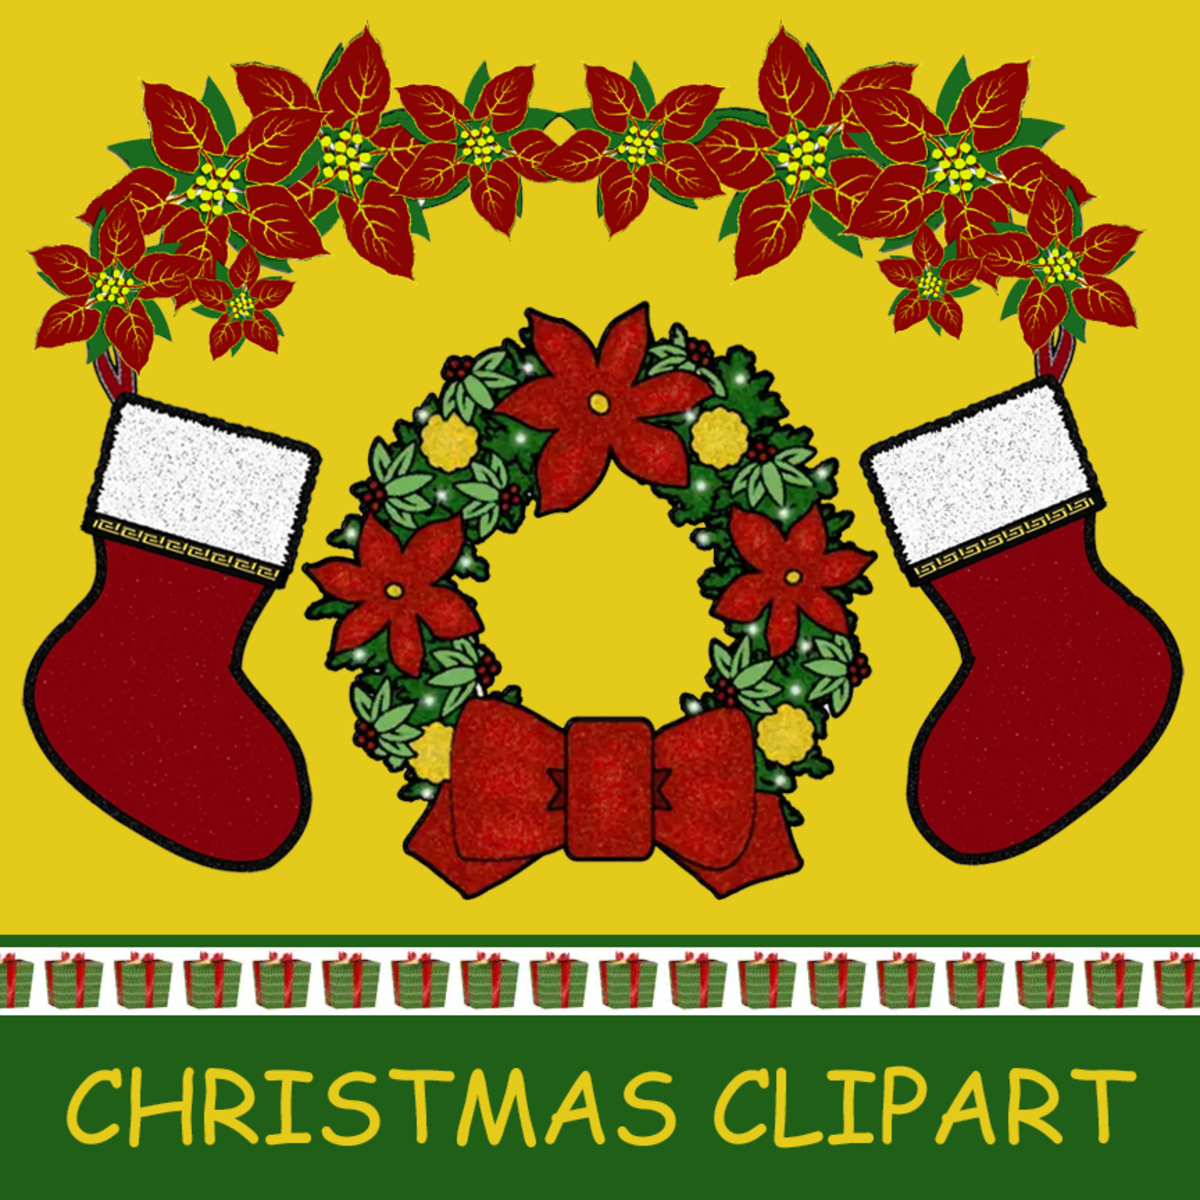 Free Christmas Clip Art Images - Nativity, Wreaths, Trees & More!